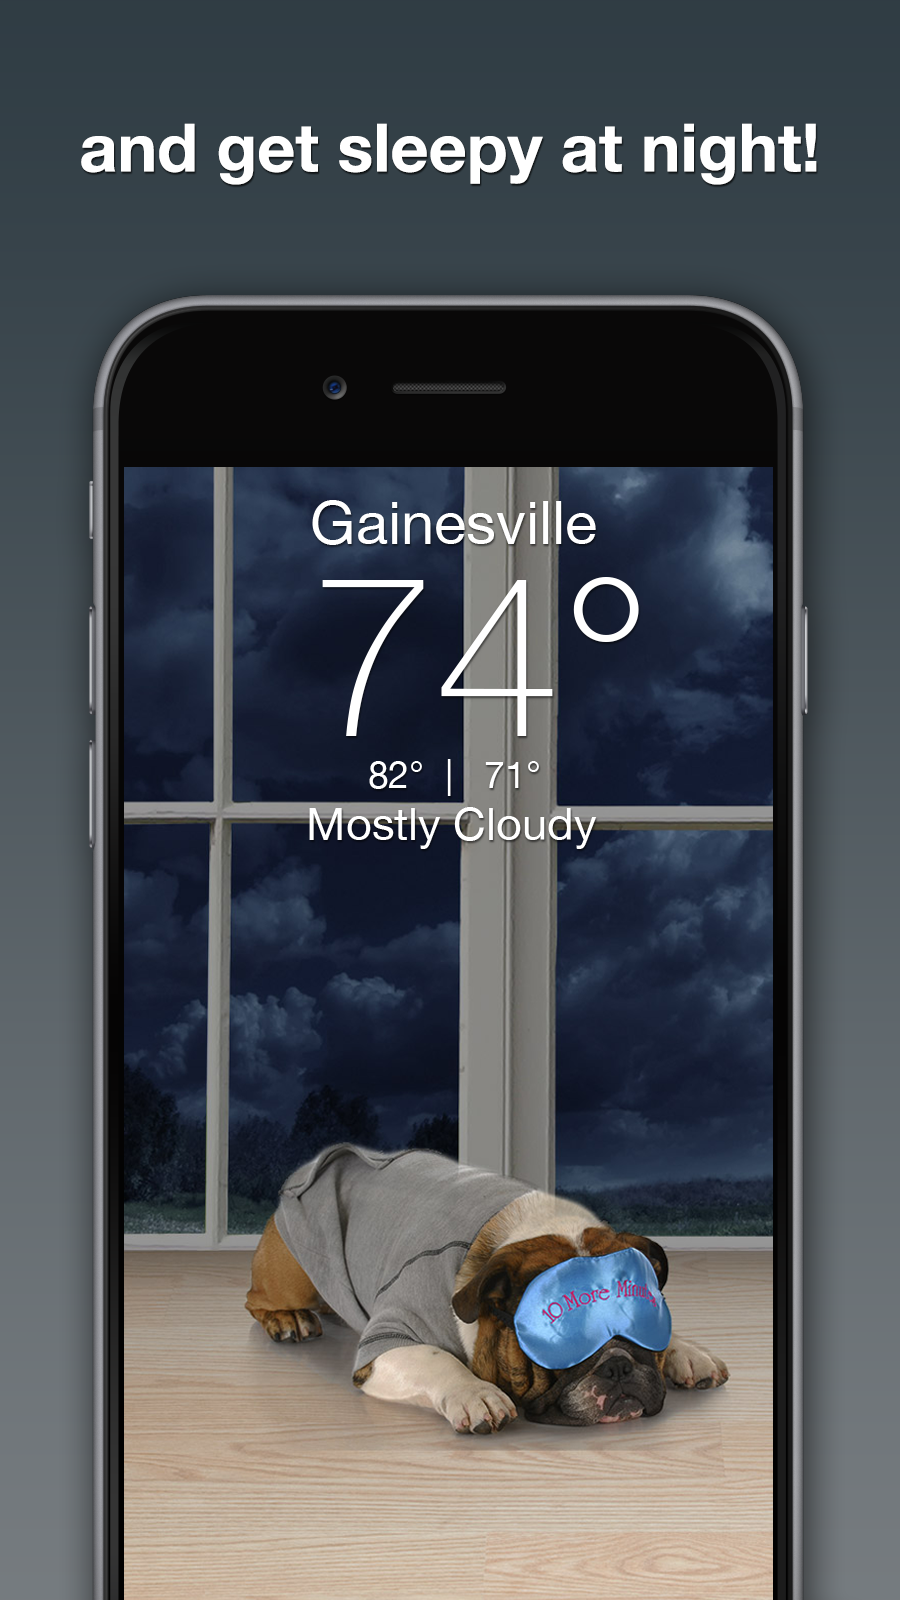 Android application Weather Puppy - App & Widget Weather Forecast screenshort